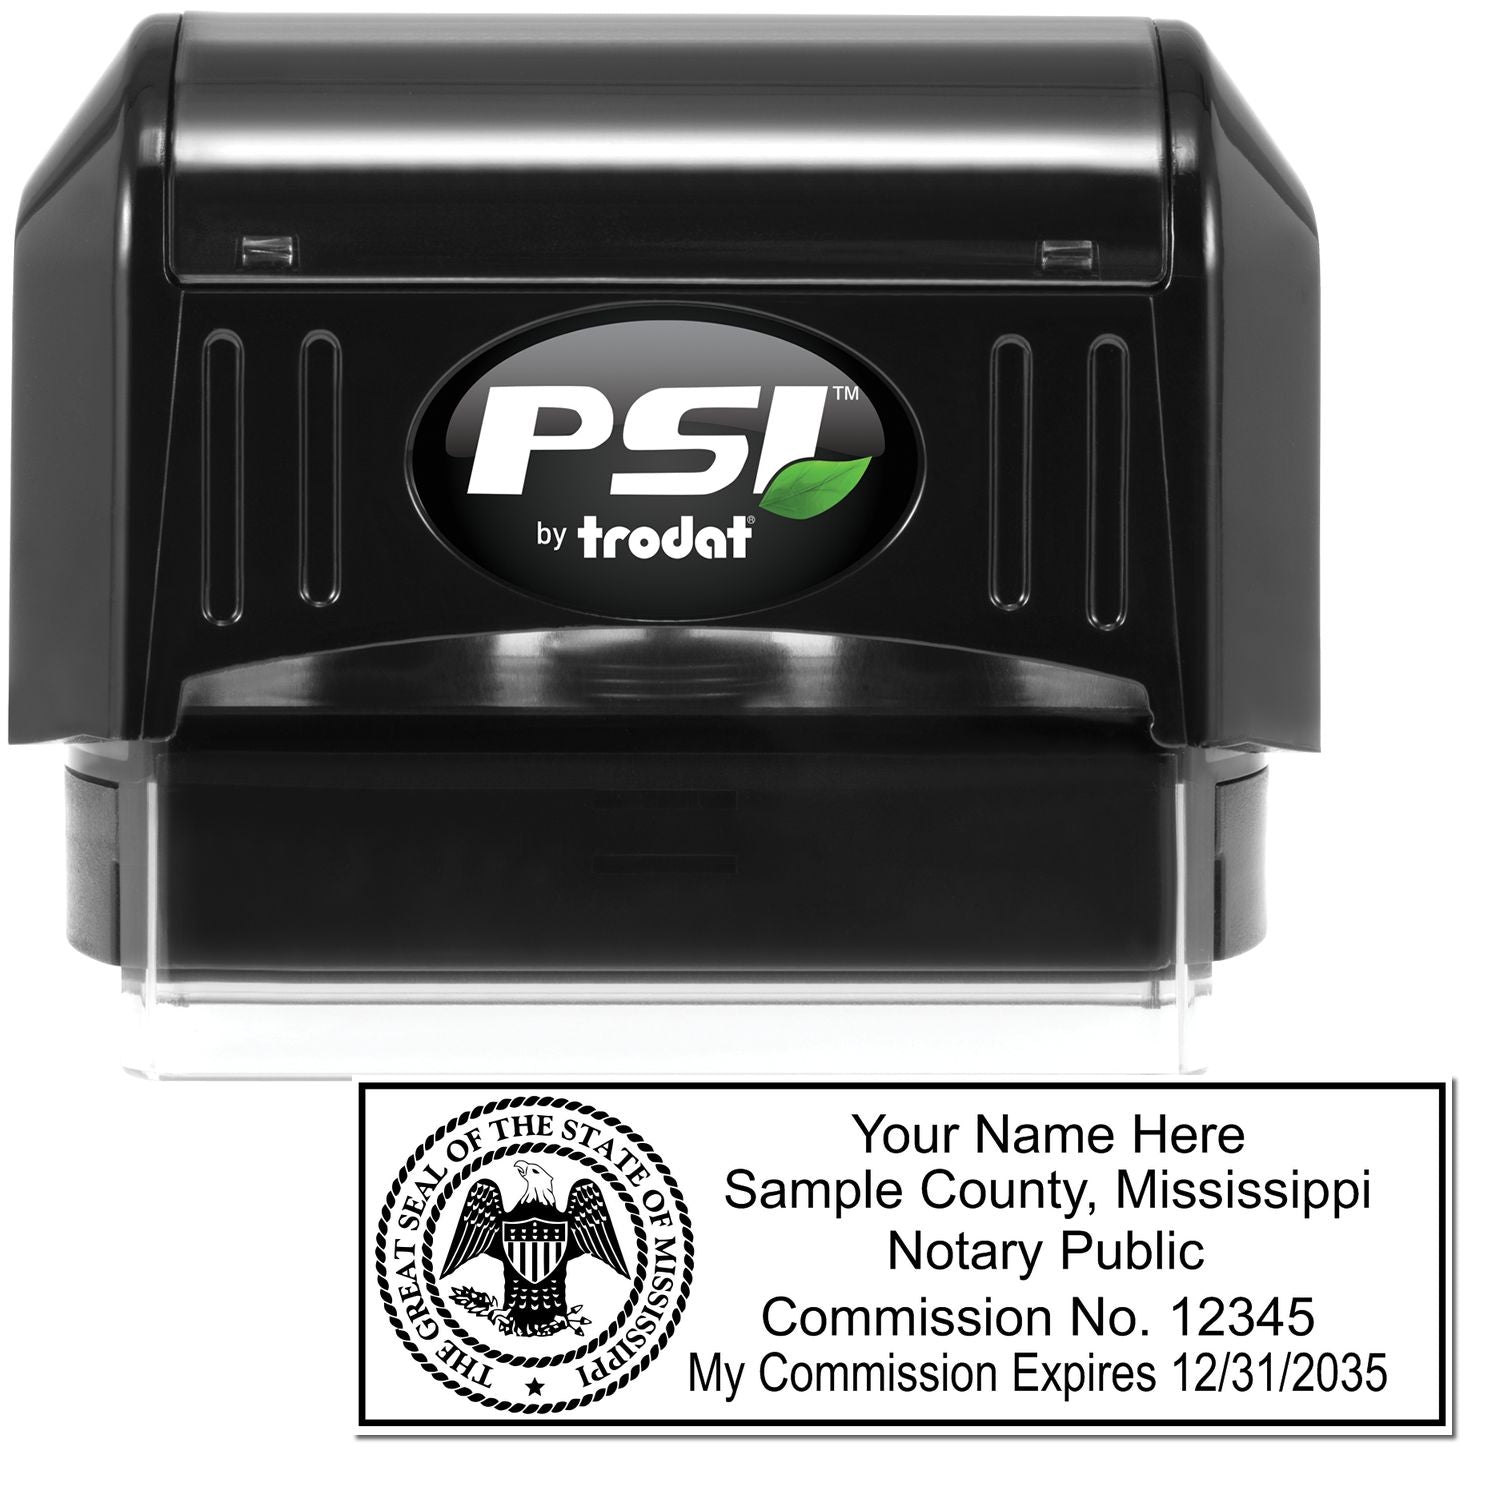 The main image for the PSI Mississippi Notary Stamp depicting a sample of the imprint and electronic files